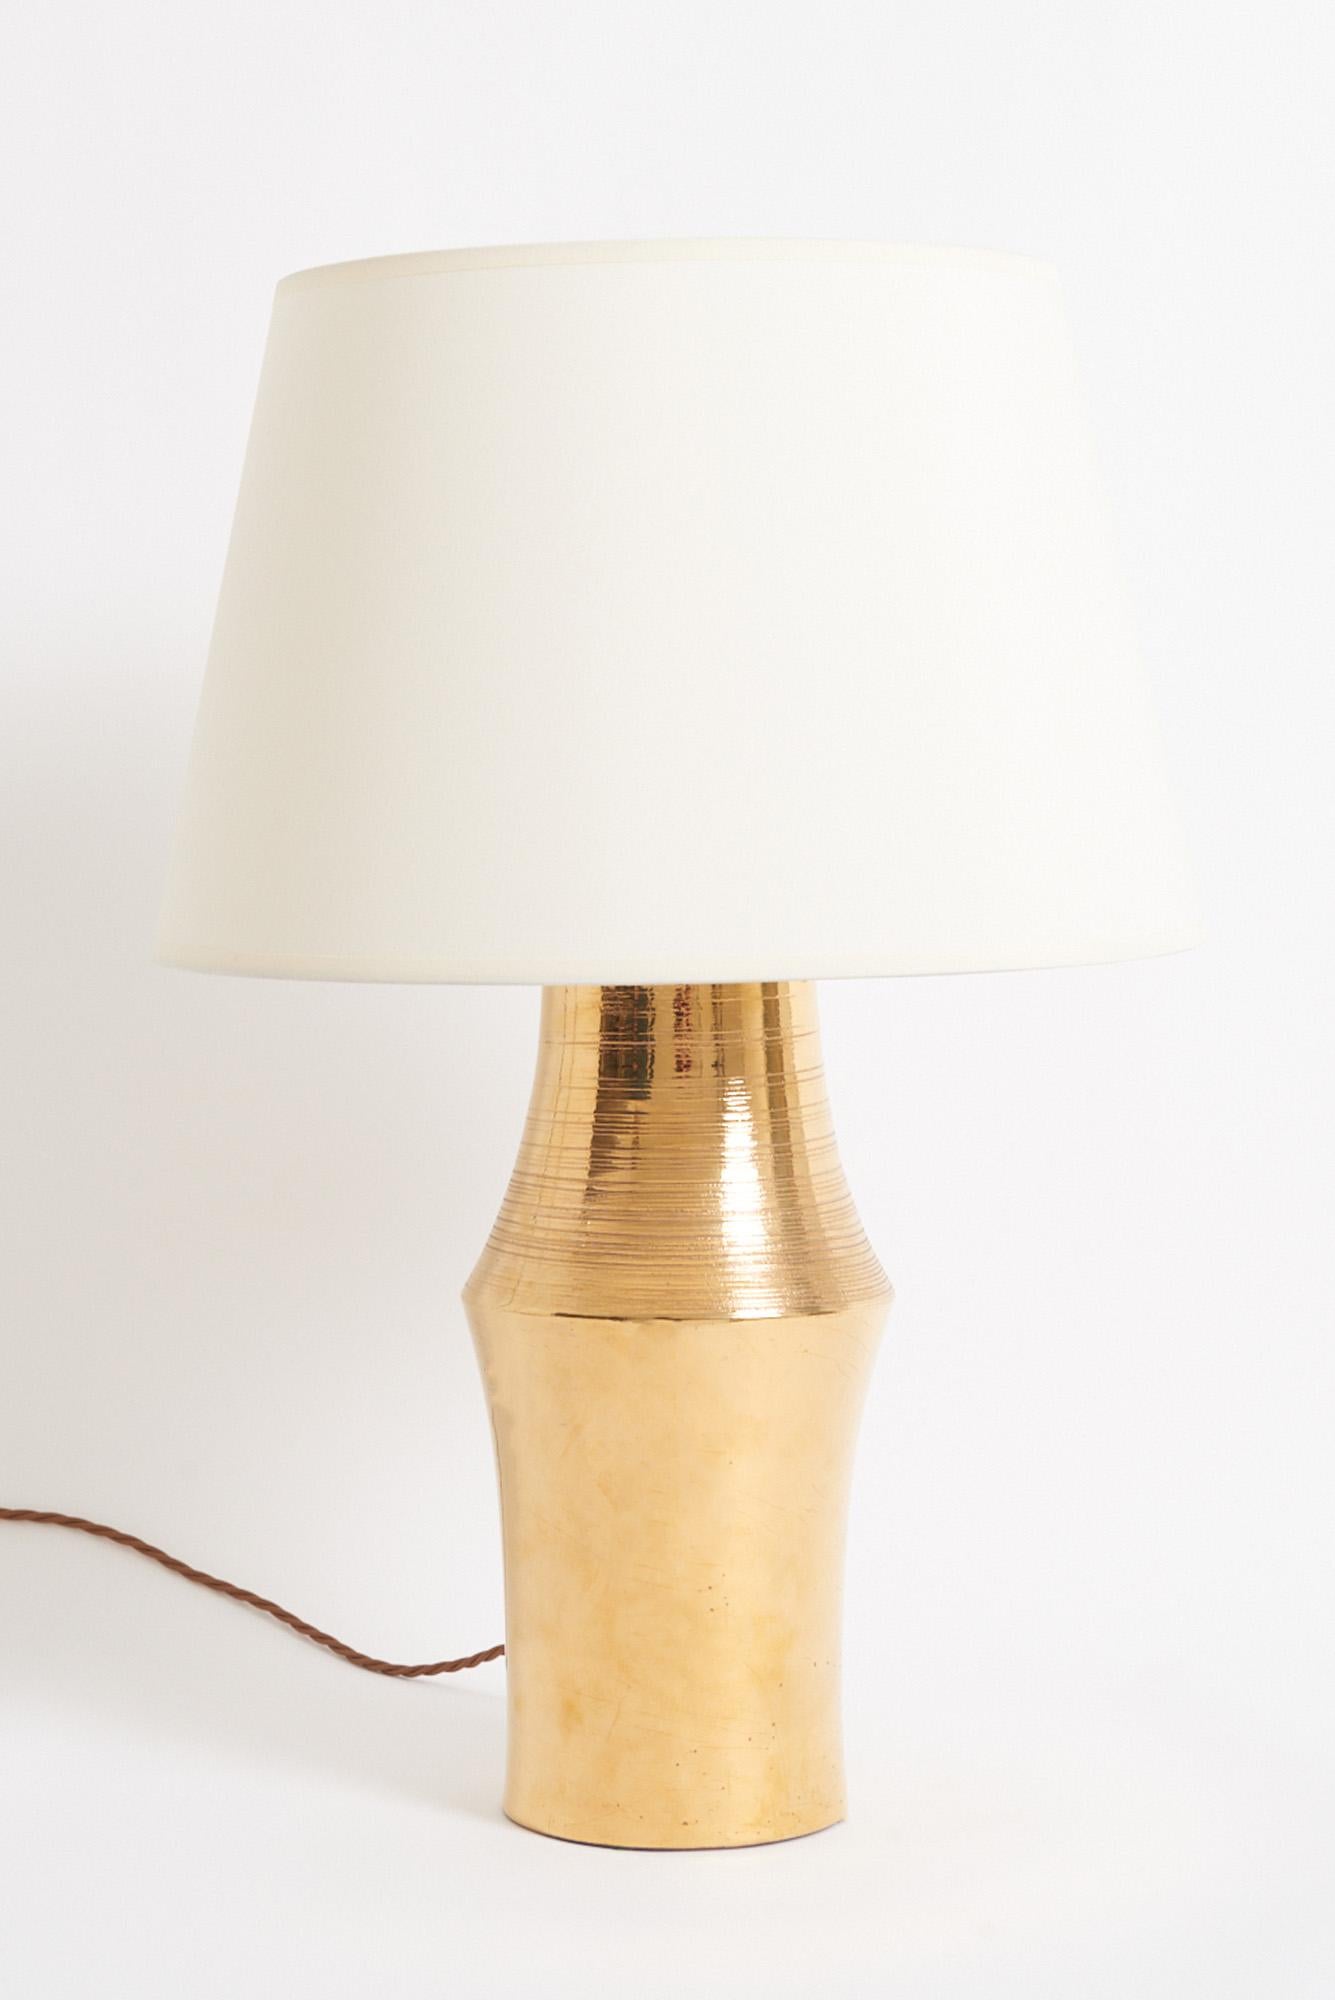 A gold glaze ceramic table lamp, manufactured by Bitossi Italy for Miranda AB in Sweden, 1970s
With the shade: 59 cm high by 41 cm diameter 
Lamp base only: 41 cm high by 19 cm diameter